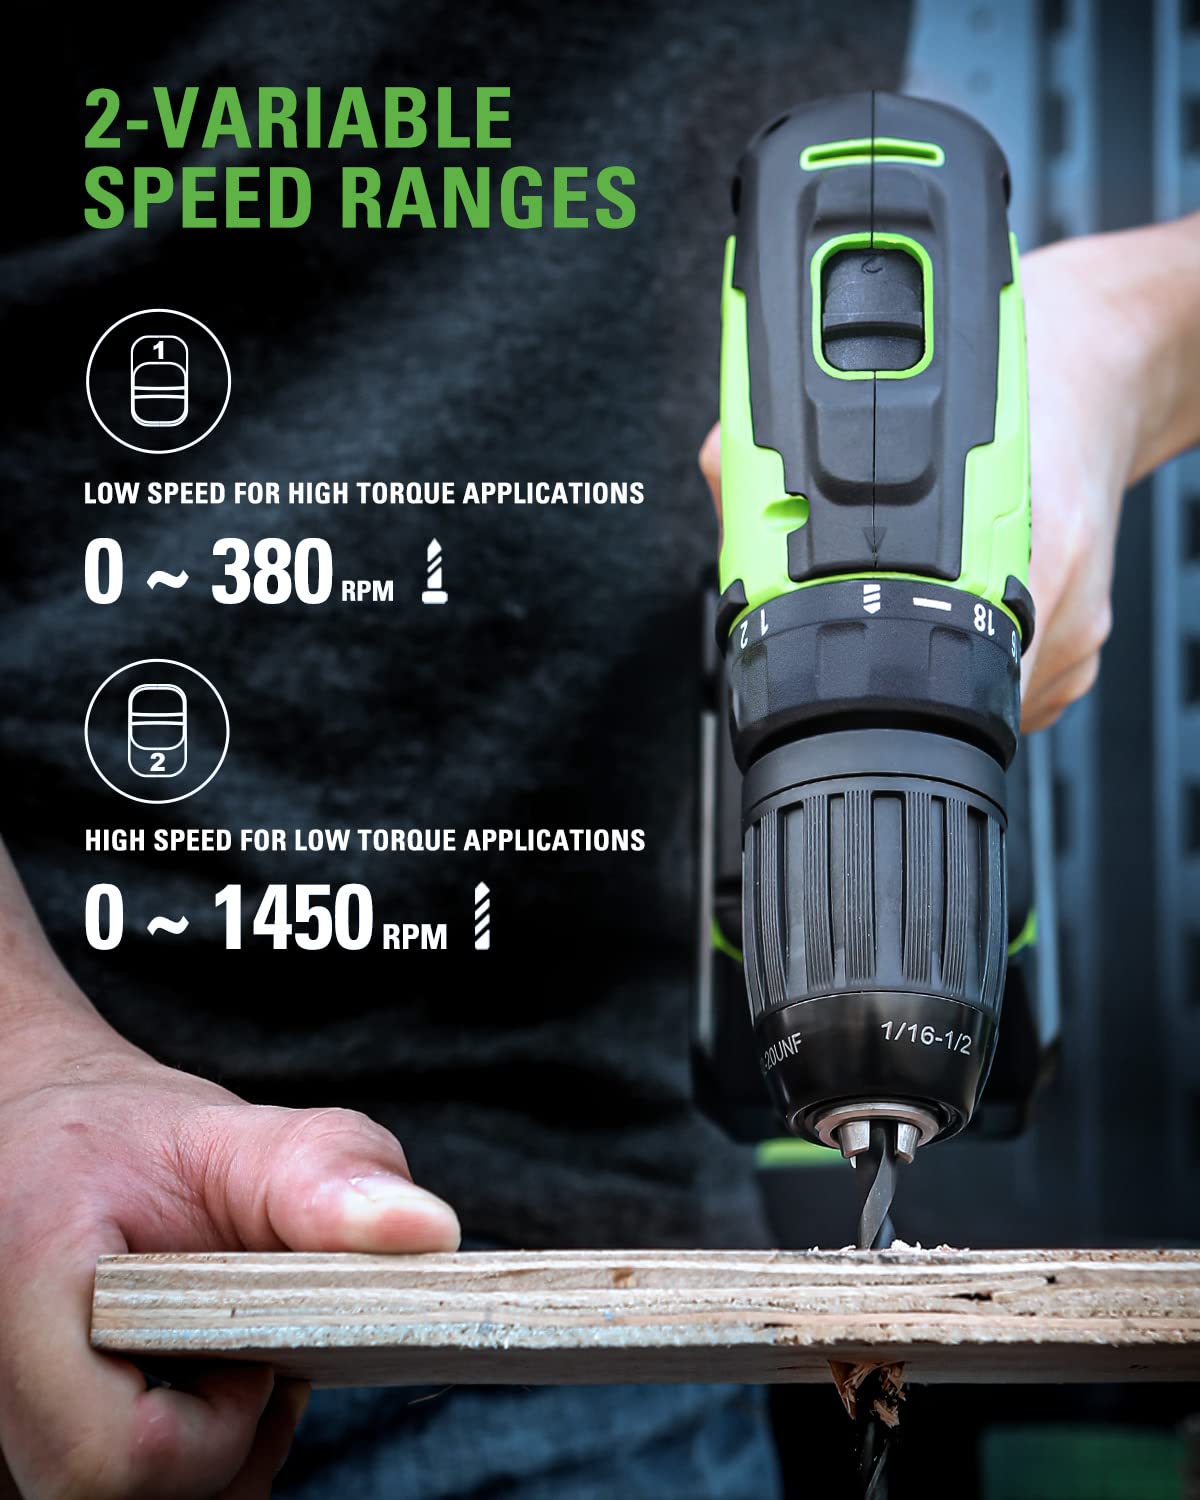 [Professional Grade] Greenworks 24V Max Cordless Brushless Drill + Impact Combo Kit, (2) 2.0Ah Batteries, FAST Charger, and Bag Included